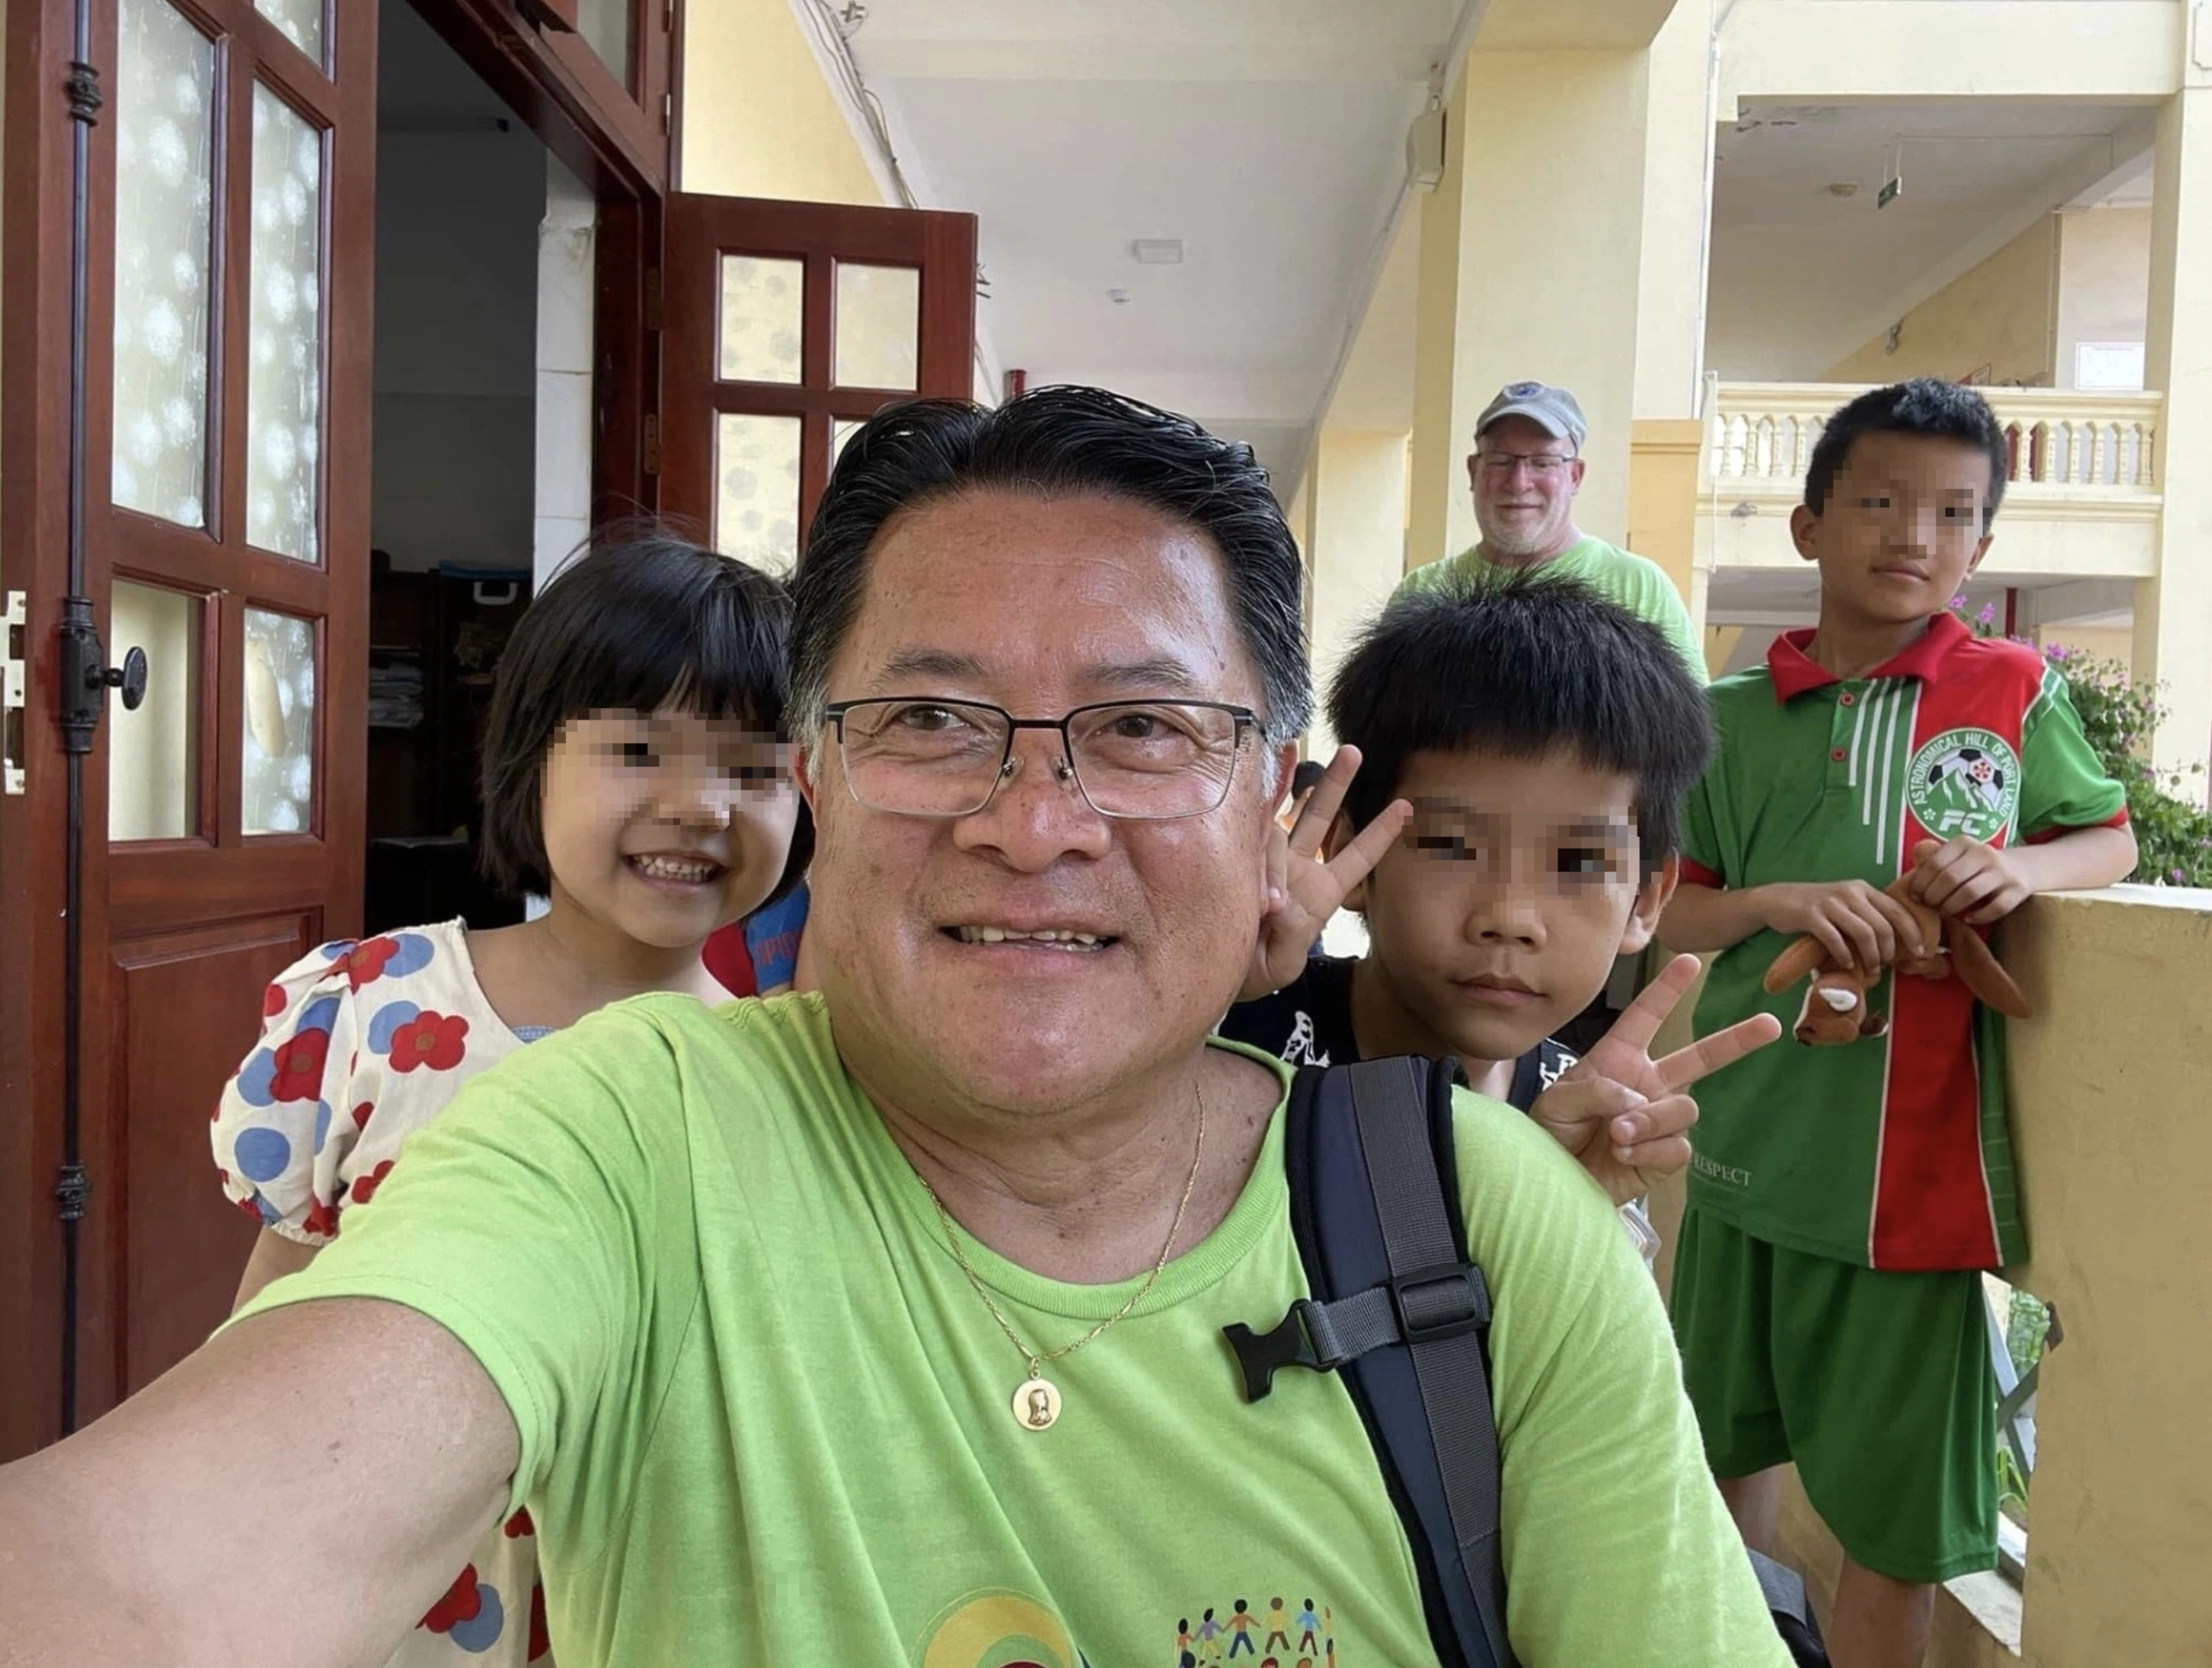 Son Michael Pham, leader of a group of members from Rotary International and Kids Without Borders, takes a wefie with children at an orphanage in Hai Phong City. Photo: Supplied